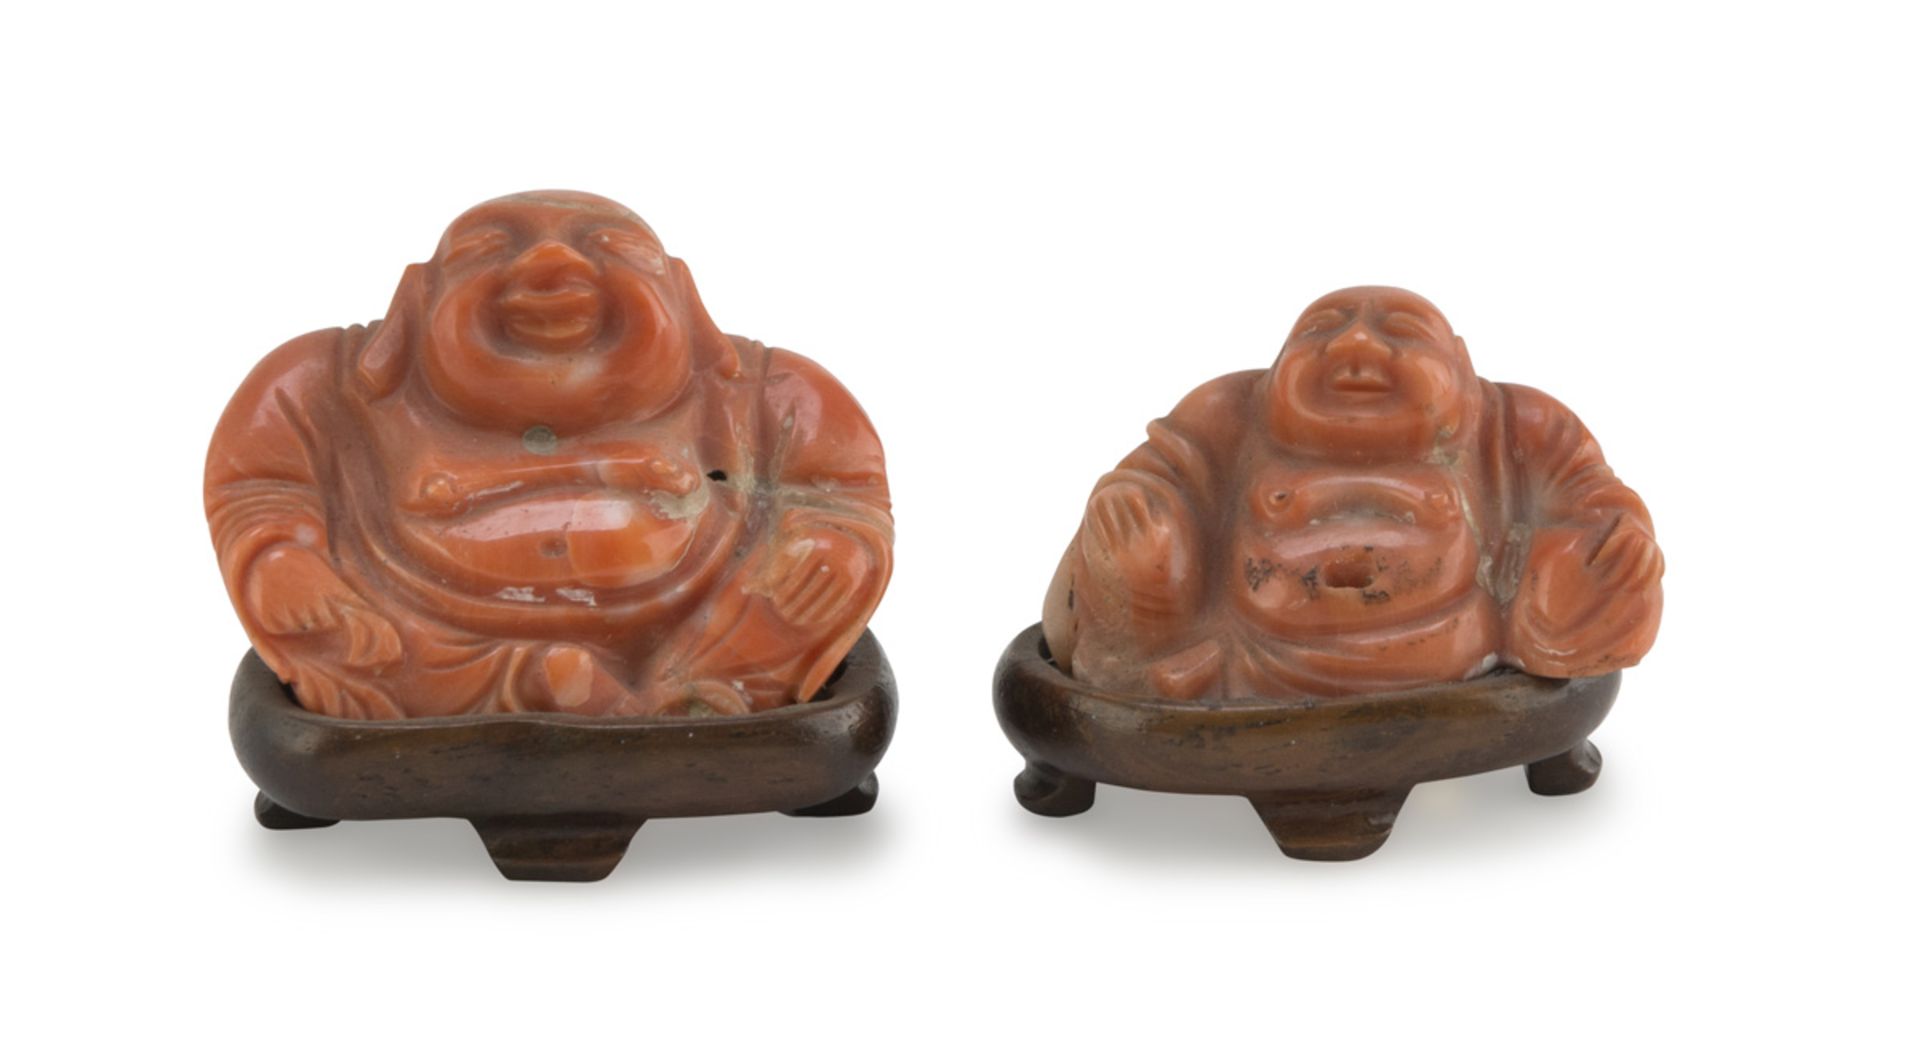 TWO CORAL SCULPTURES, CHINA EARLY 20TH CENTURY representing Budai portrayed in the classical